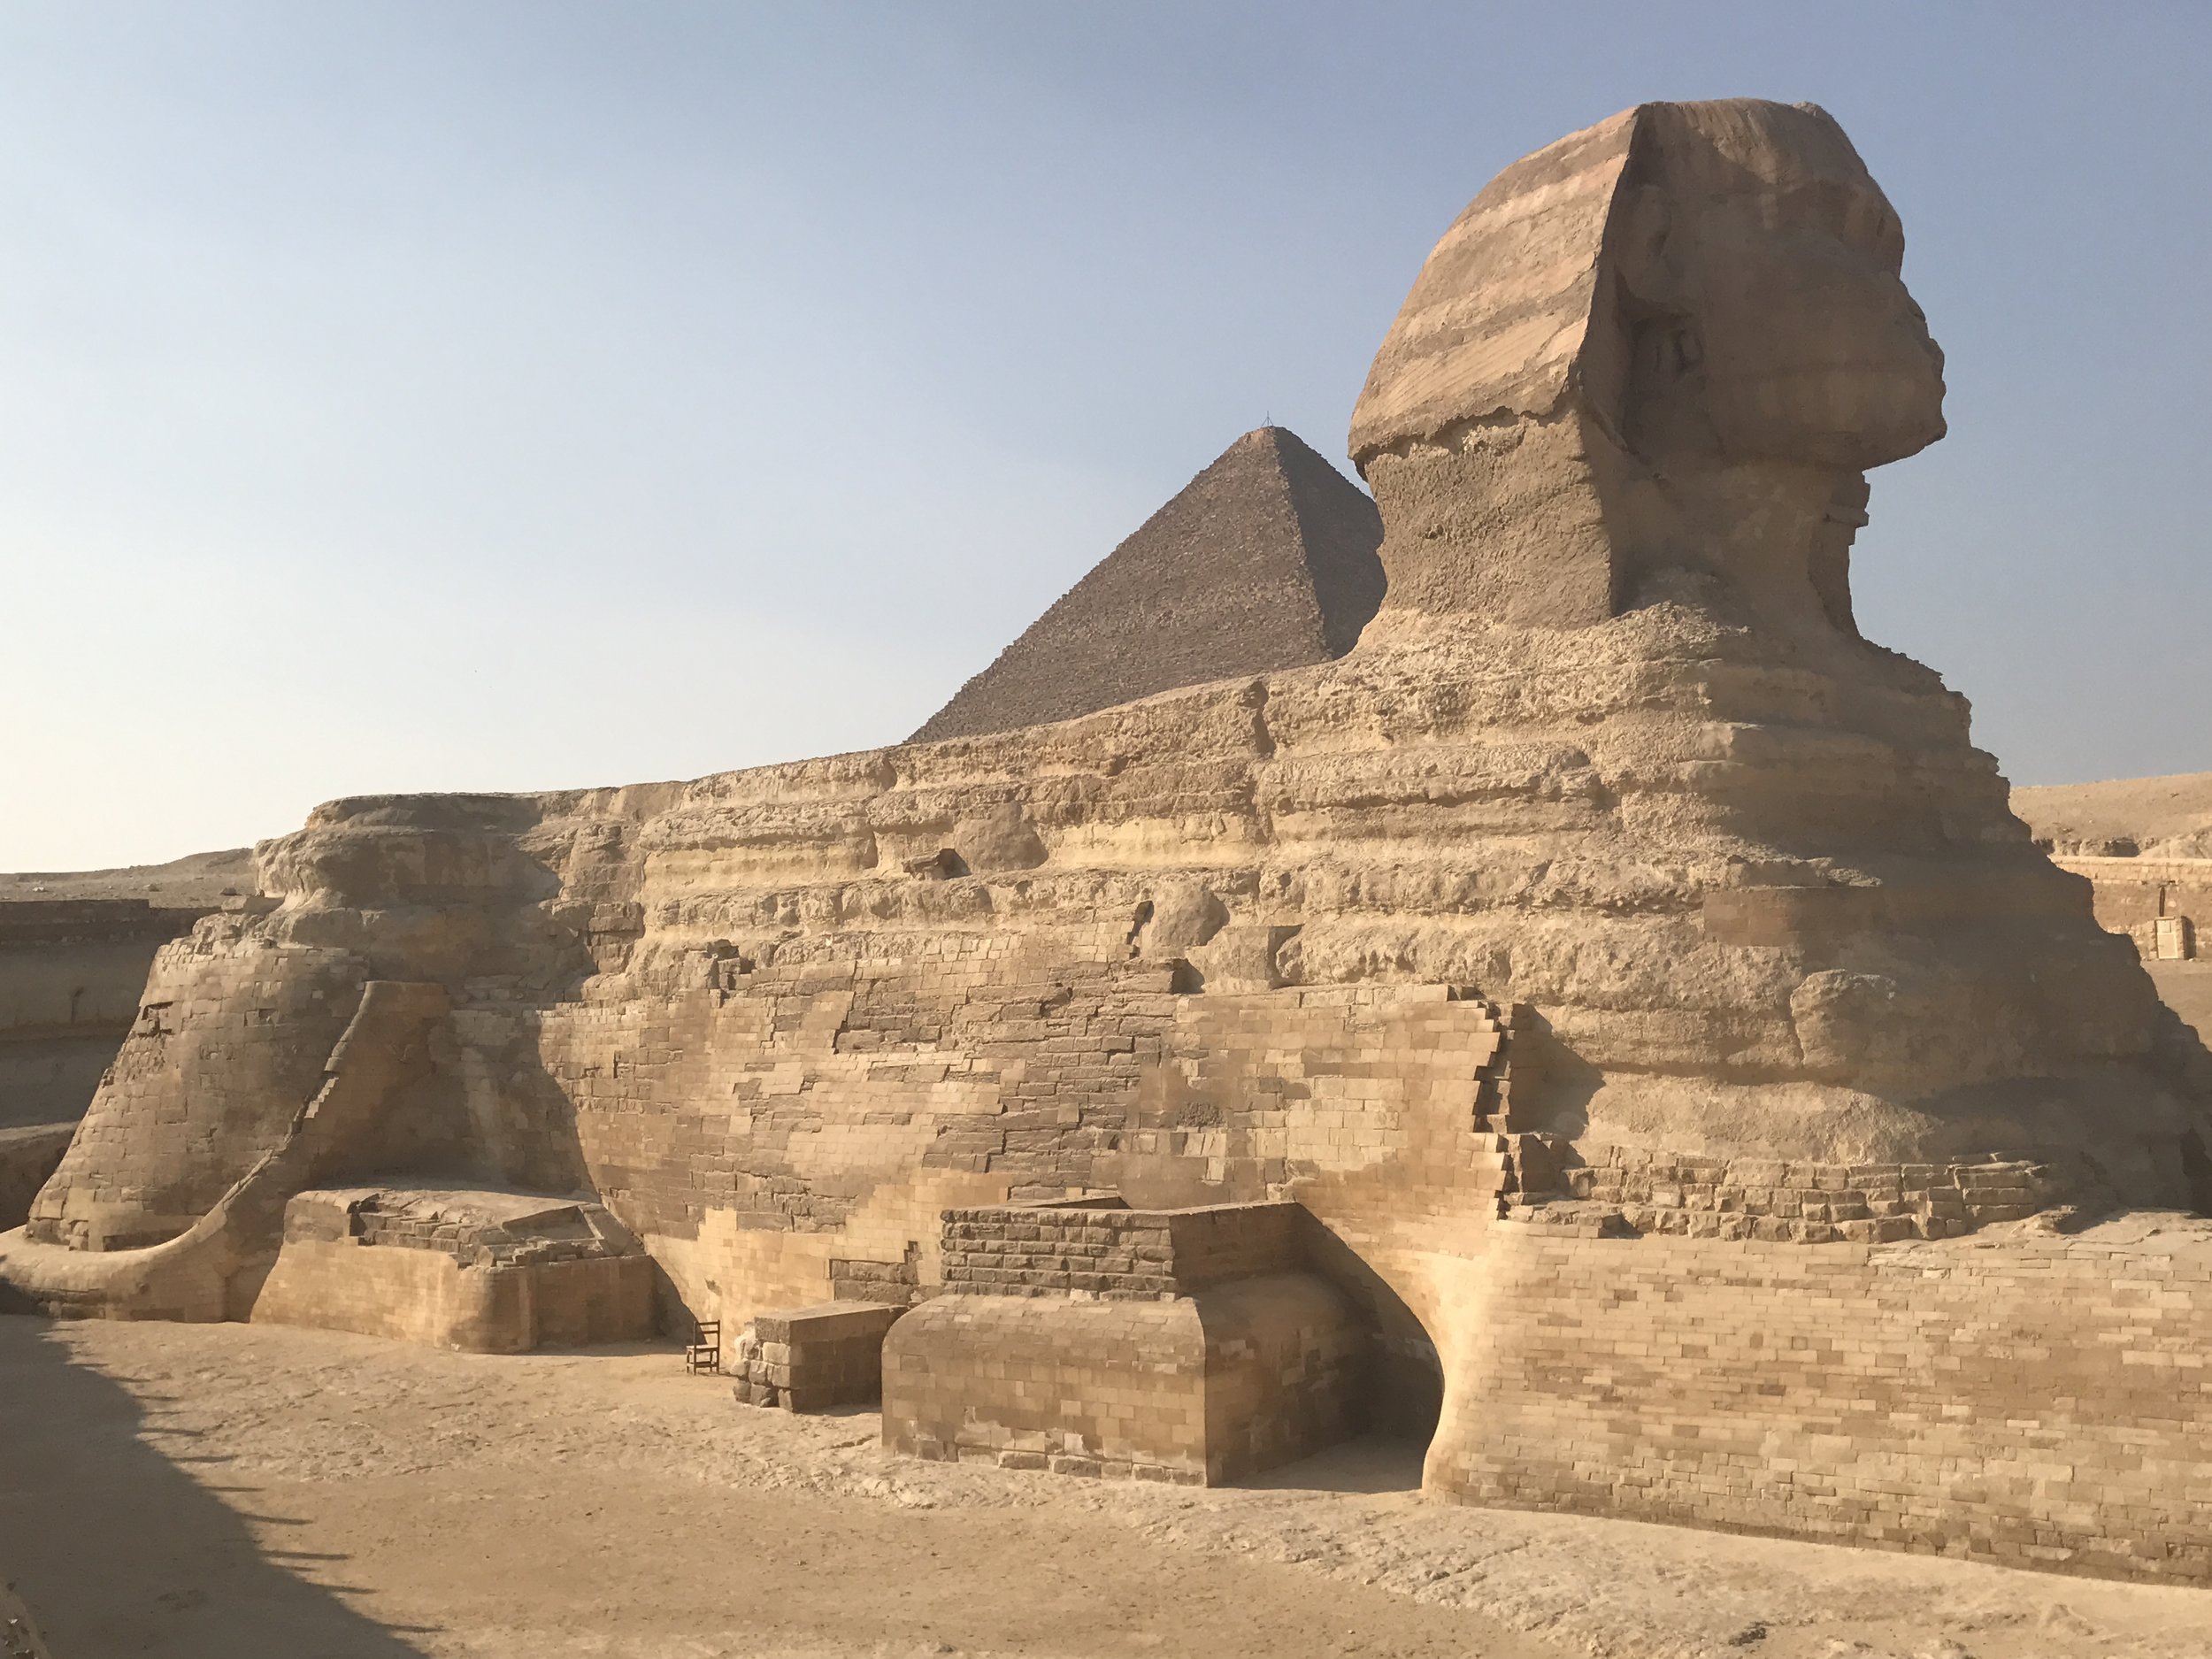 The Great Sphinx At Giza (by Erika Mermuse)